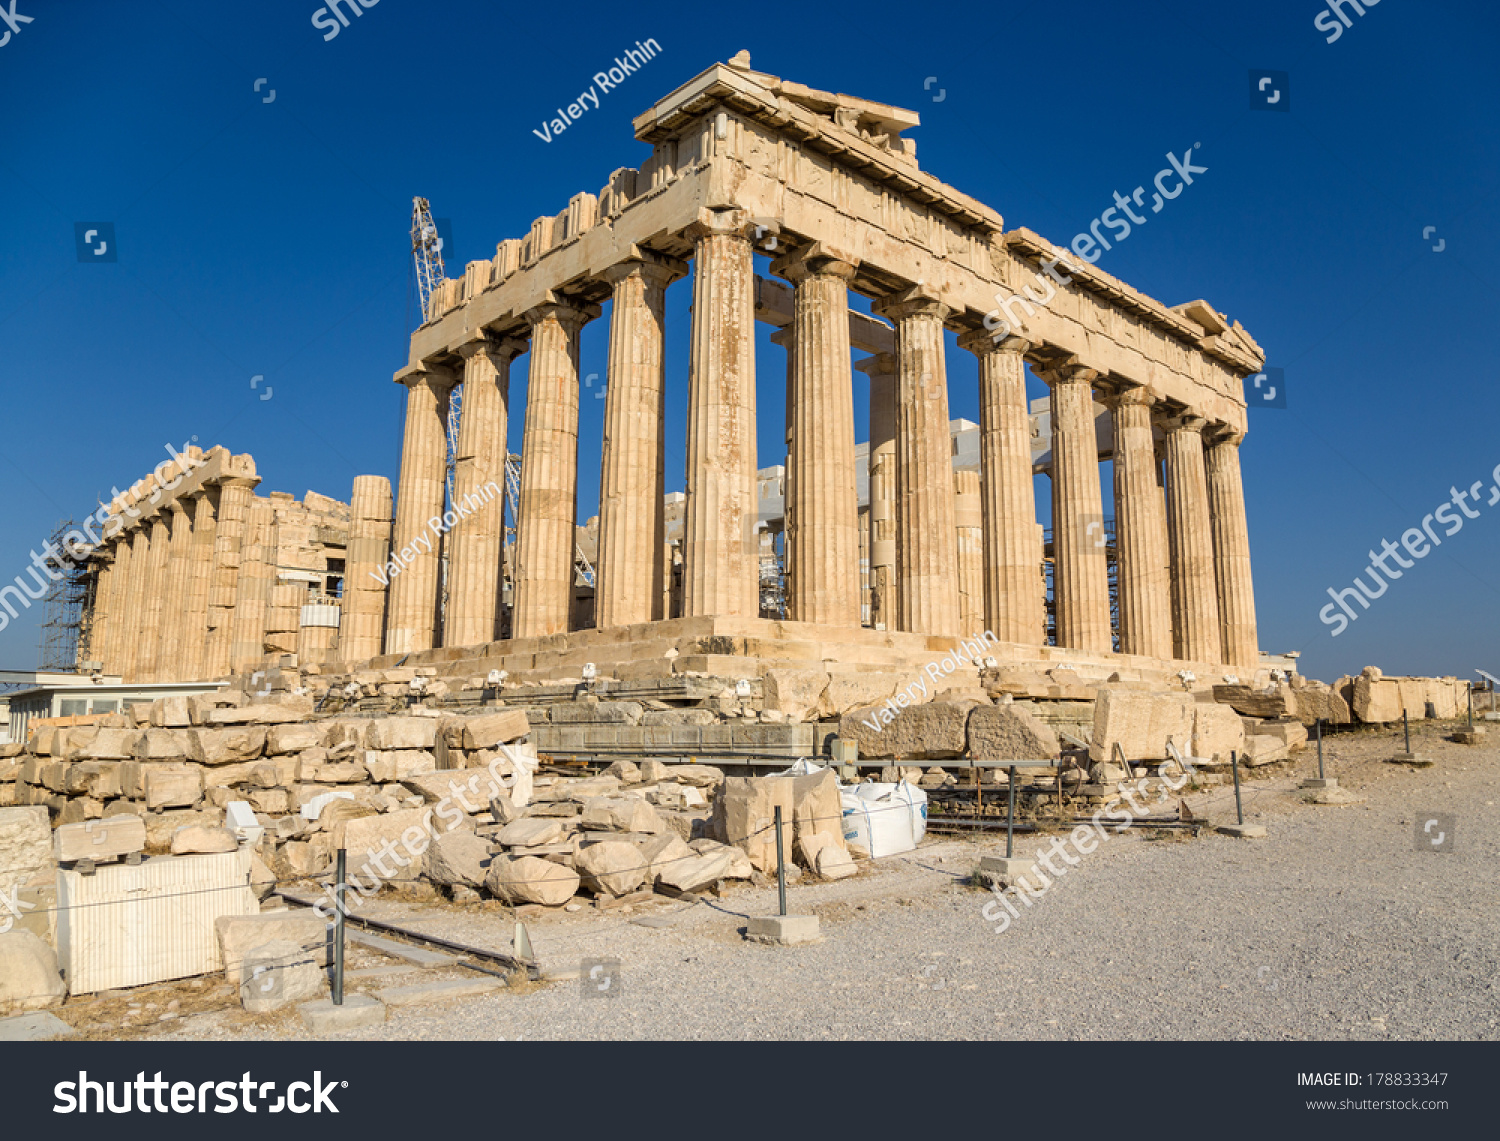 The parthenon is dedicated to